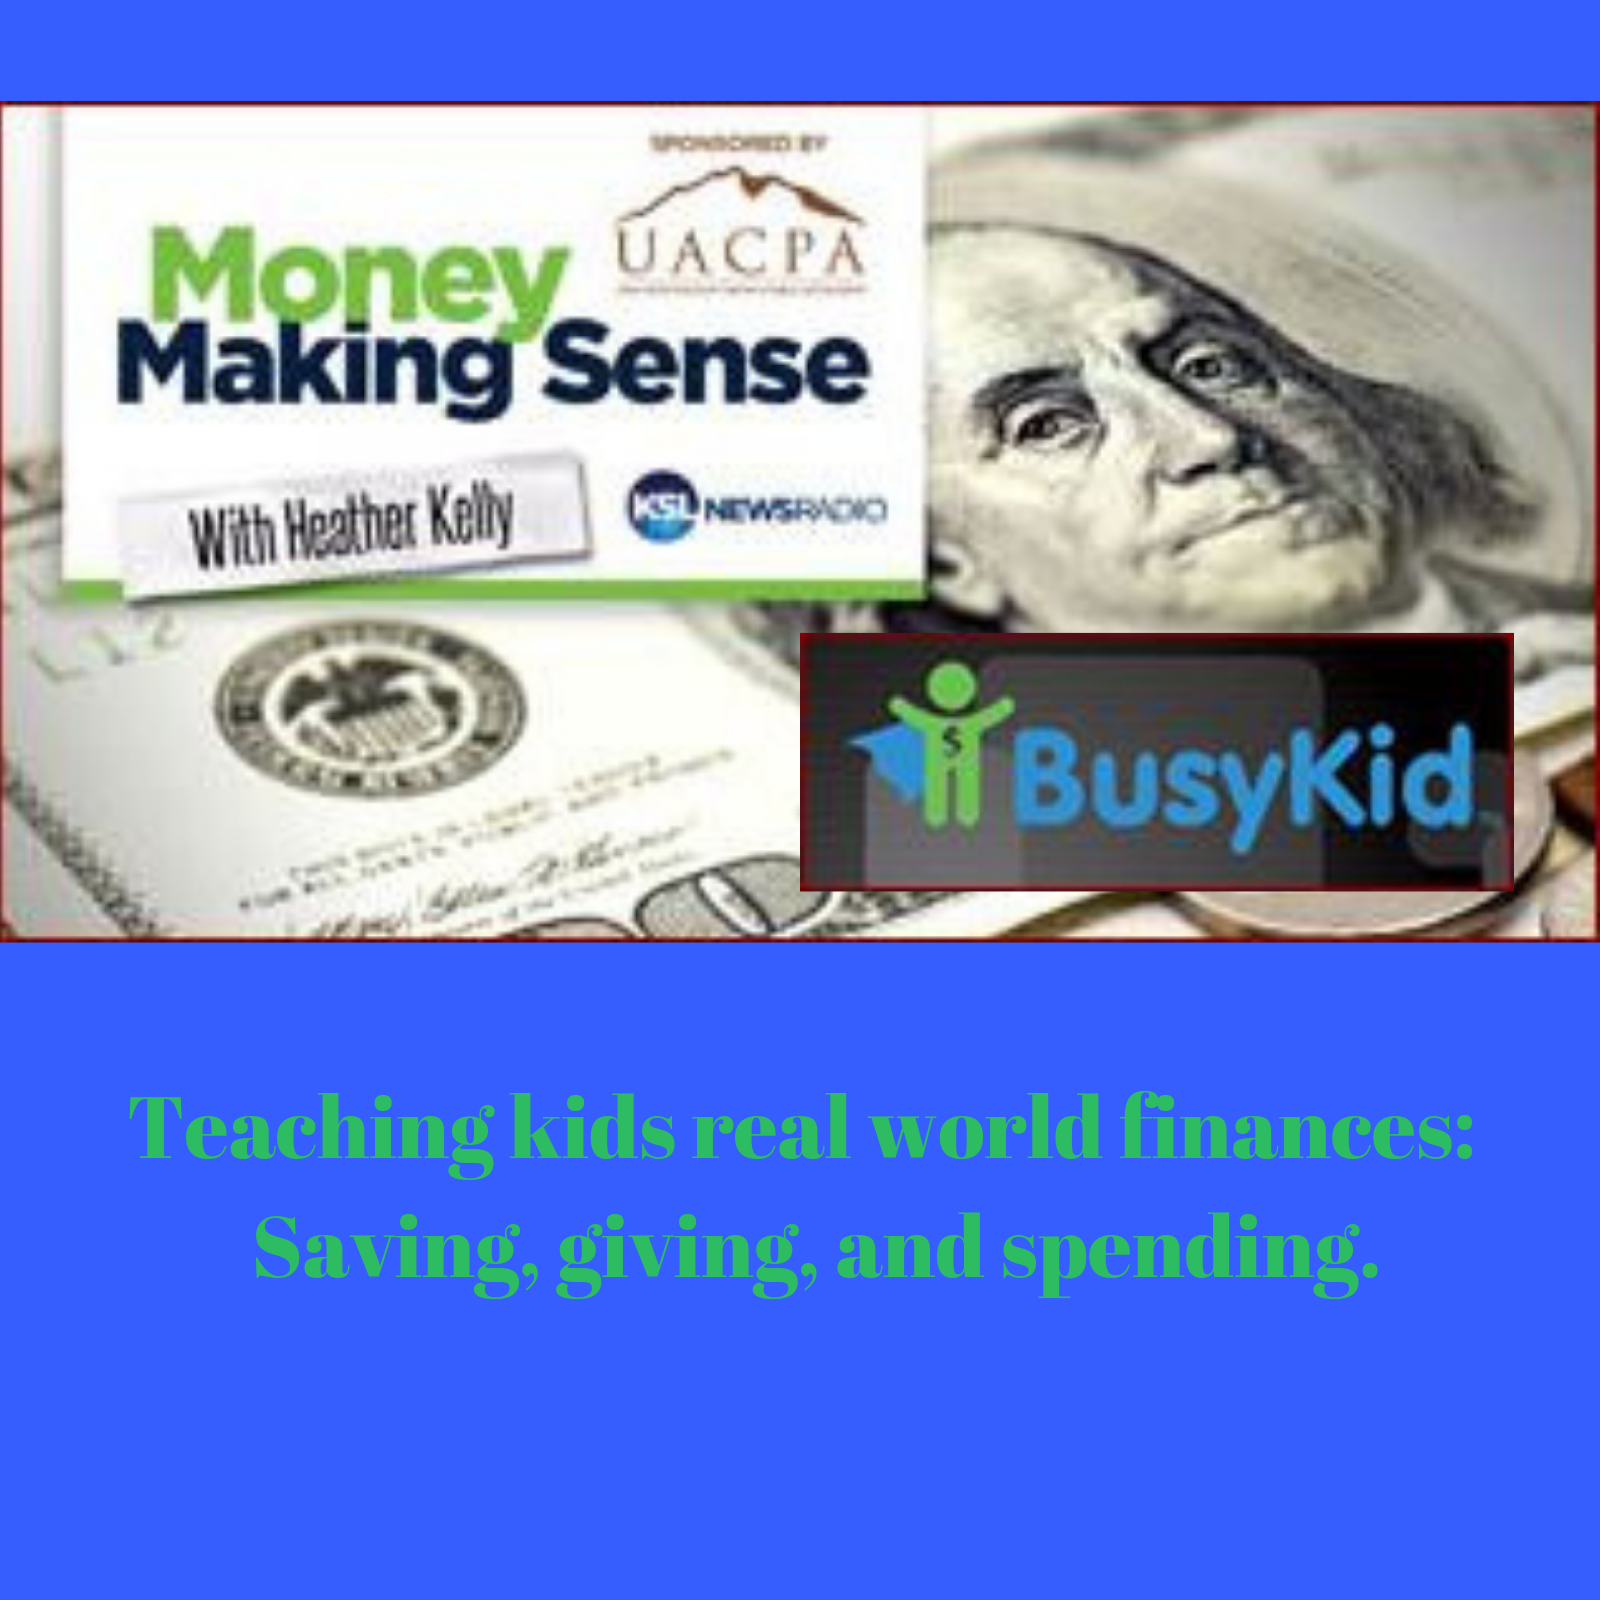 Teaching kids to save, share and spend money